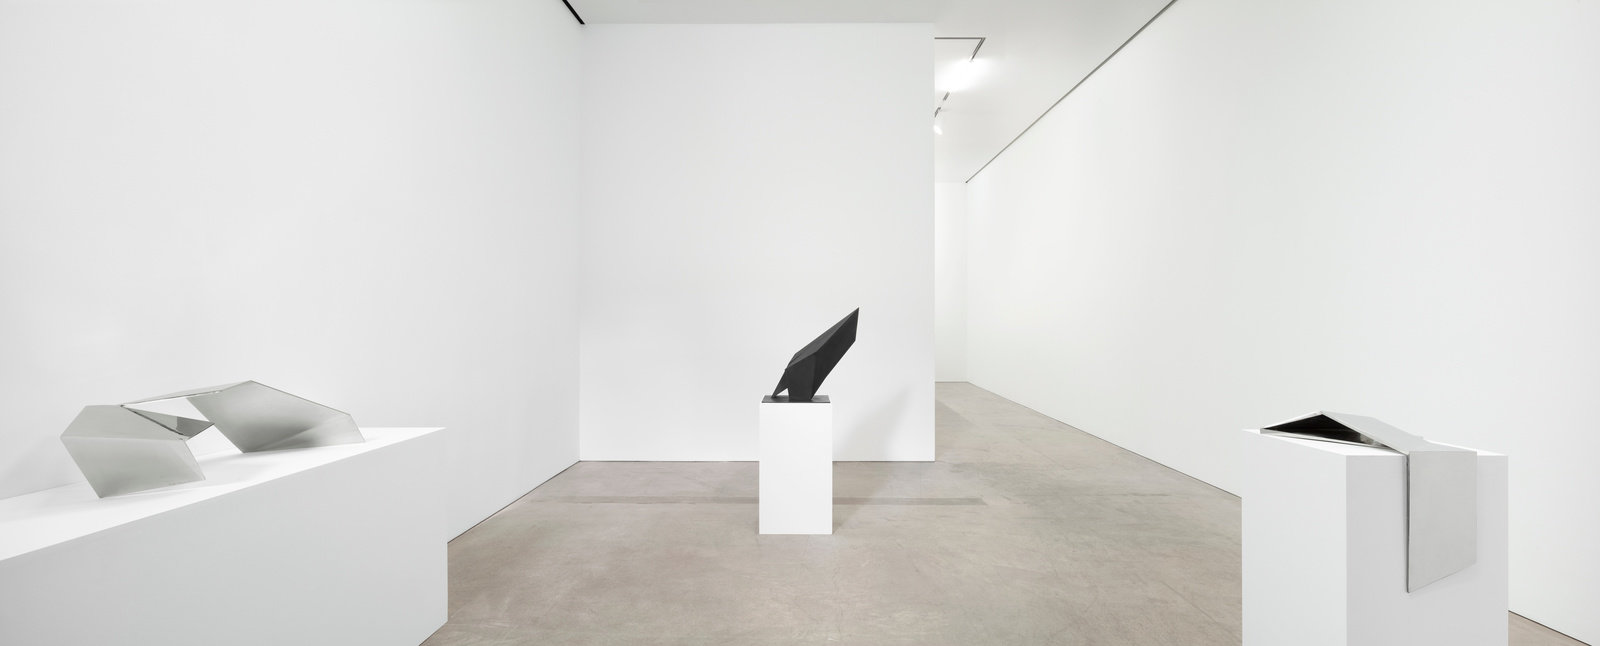 Beverly pepper, selected works 1968 2018, installation view 2 pierre le hors